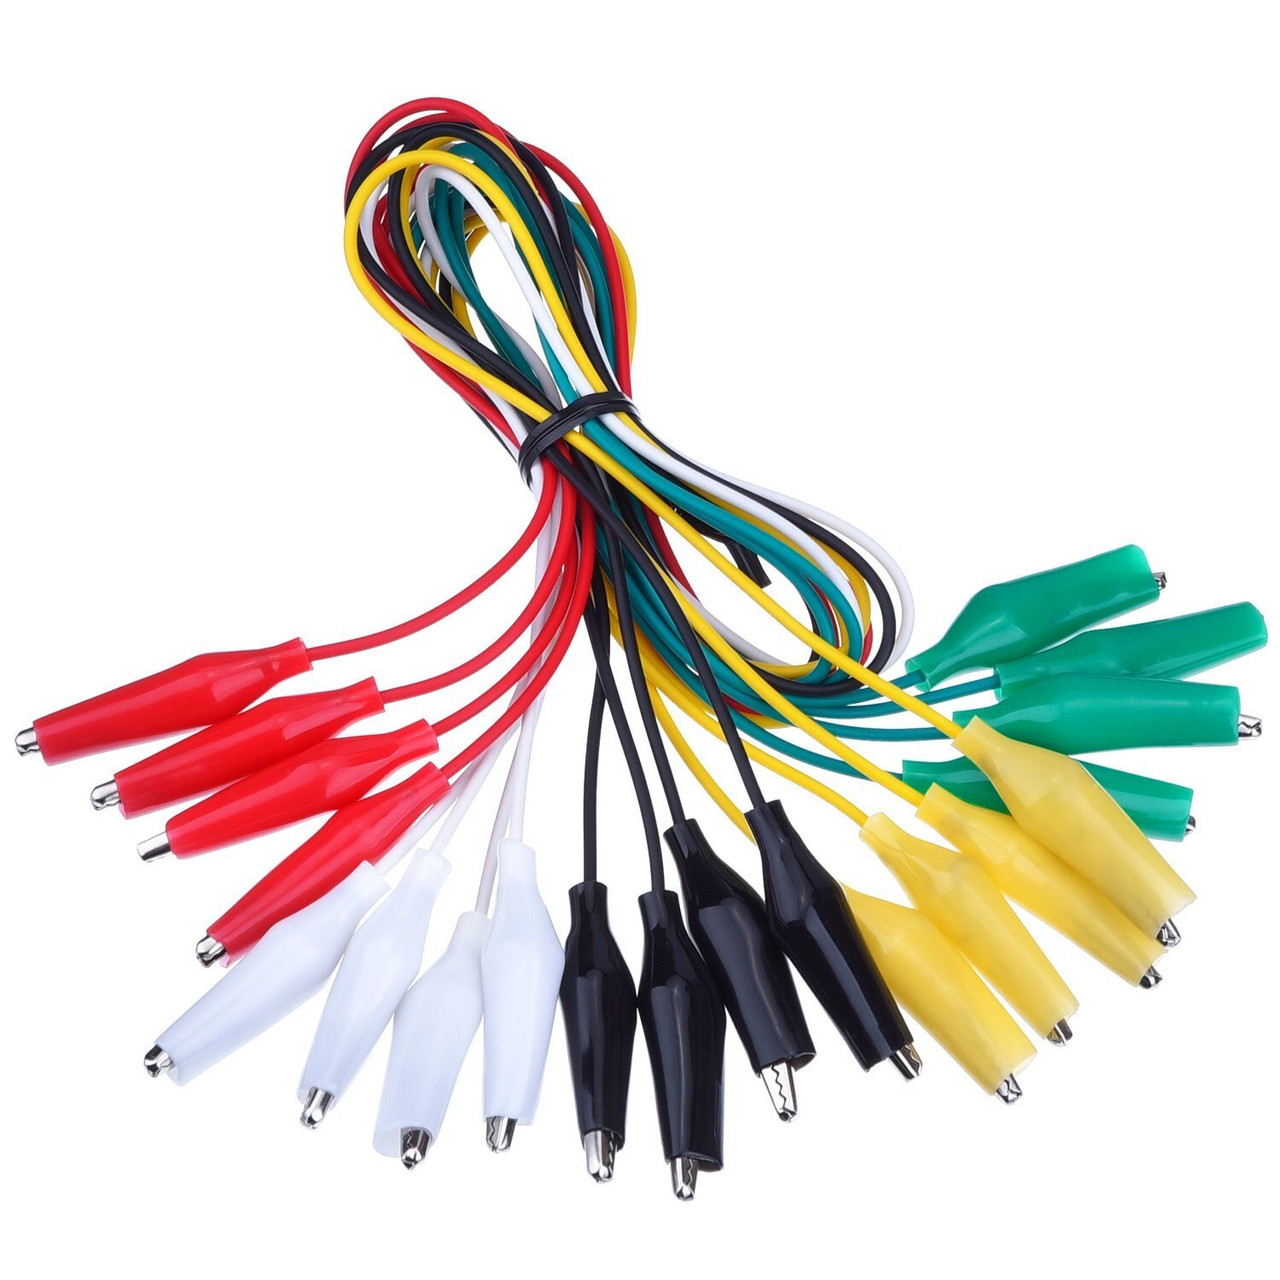 10 Pcs Colorful Double Ended Alligator Clips Test Lead Jumper Wires 2020 Q8O5 